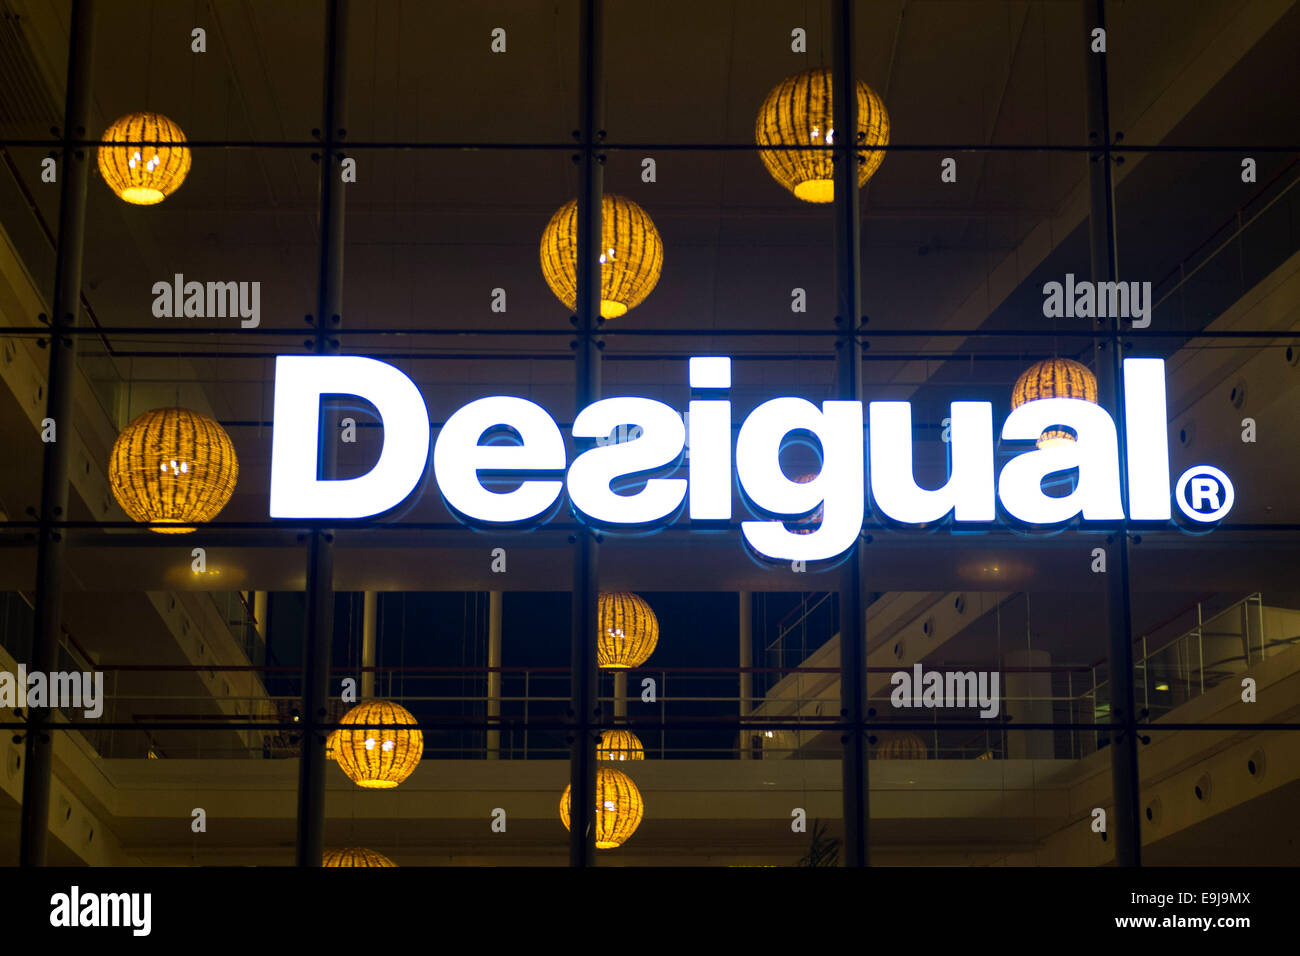 The Desigual clothes fashion shop store in Barcelona, Spain Stock Photo